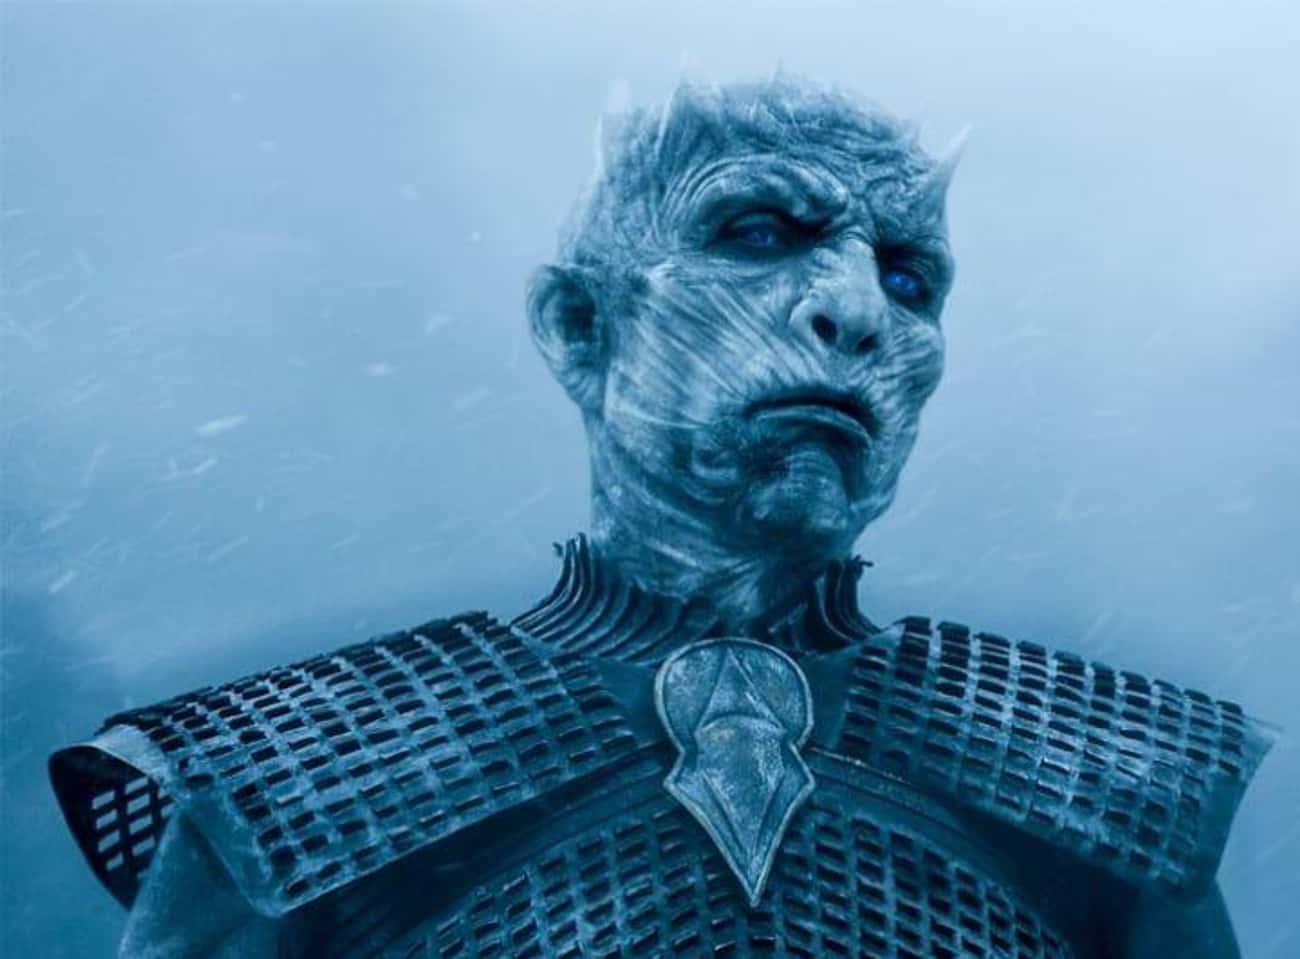 Who Is The Night King?